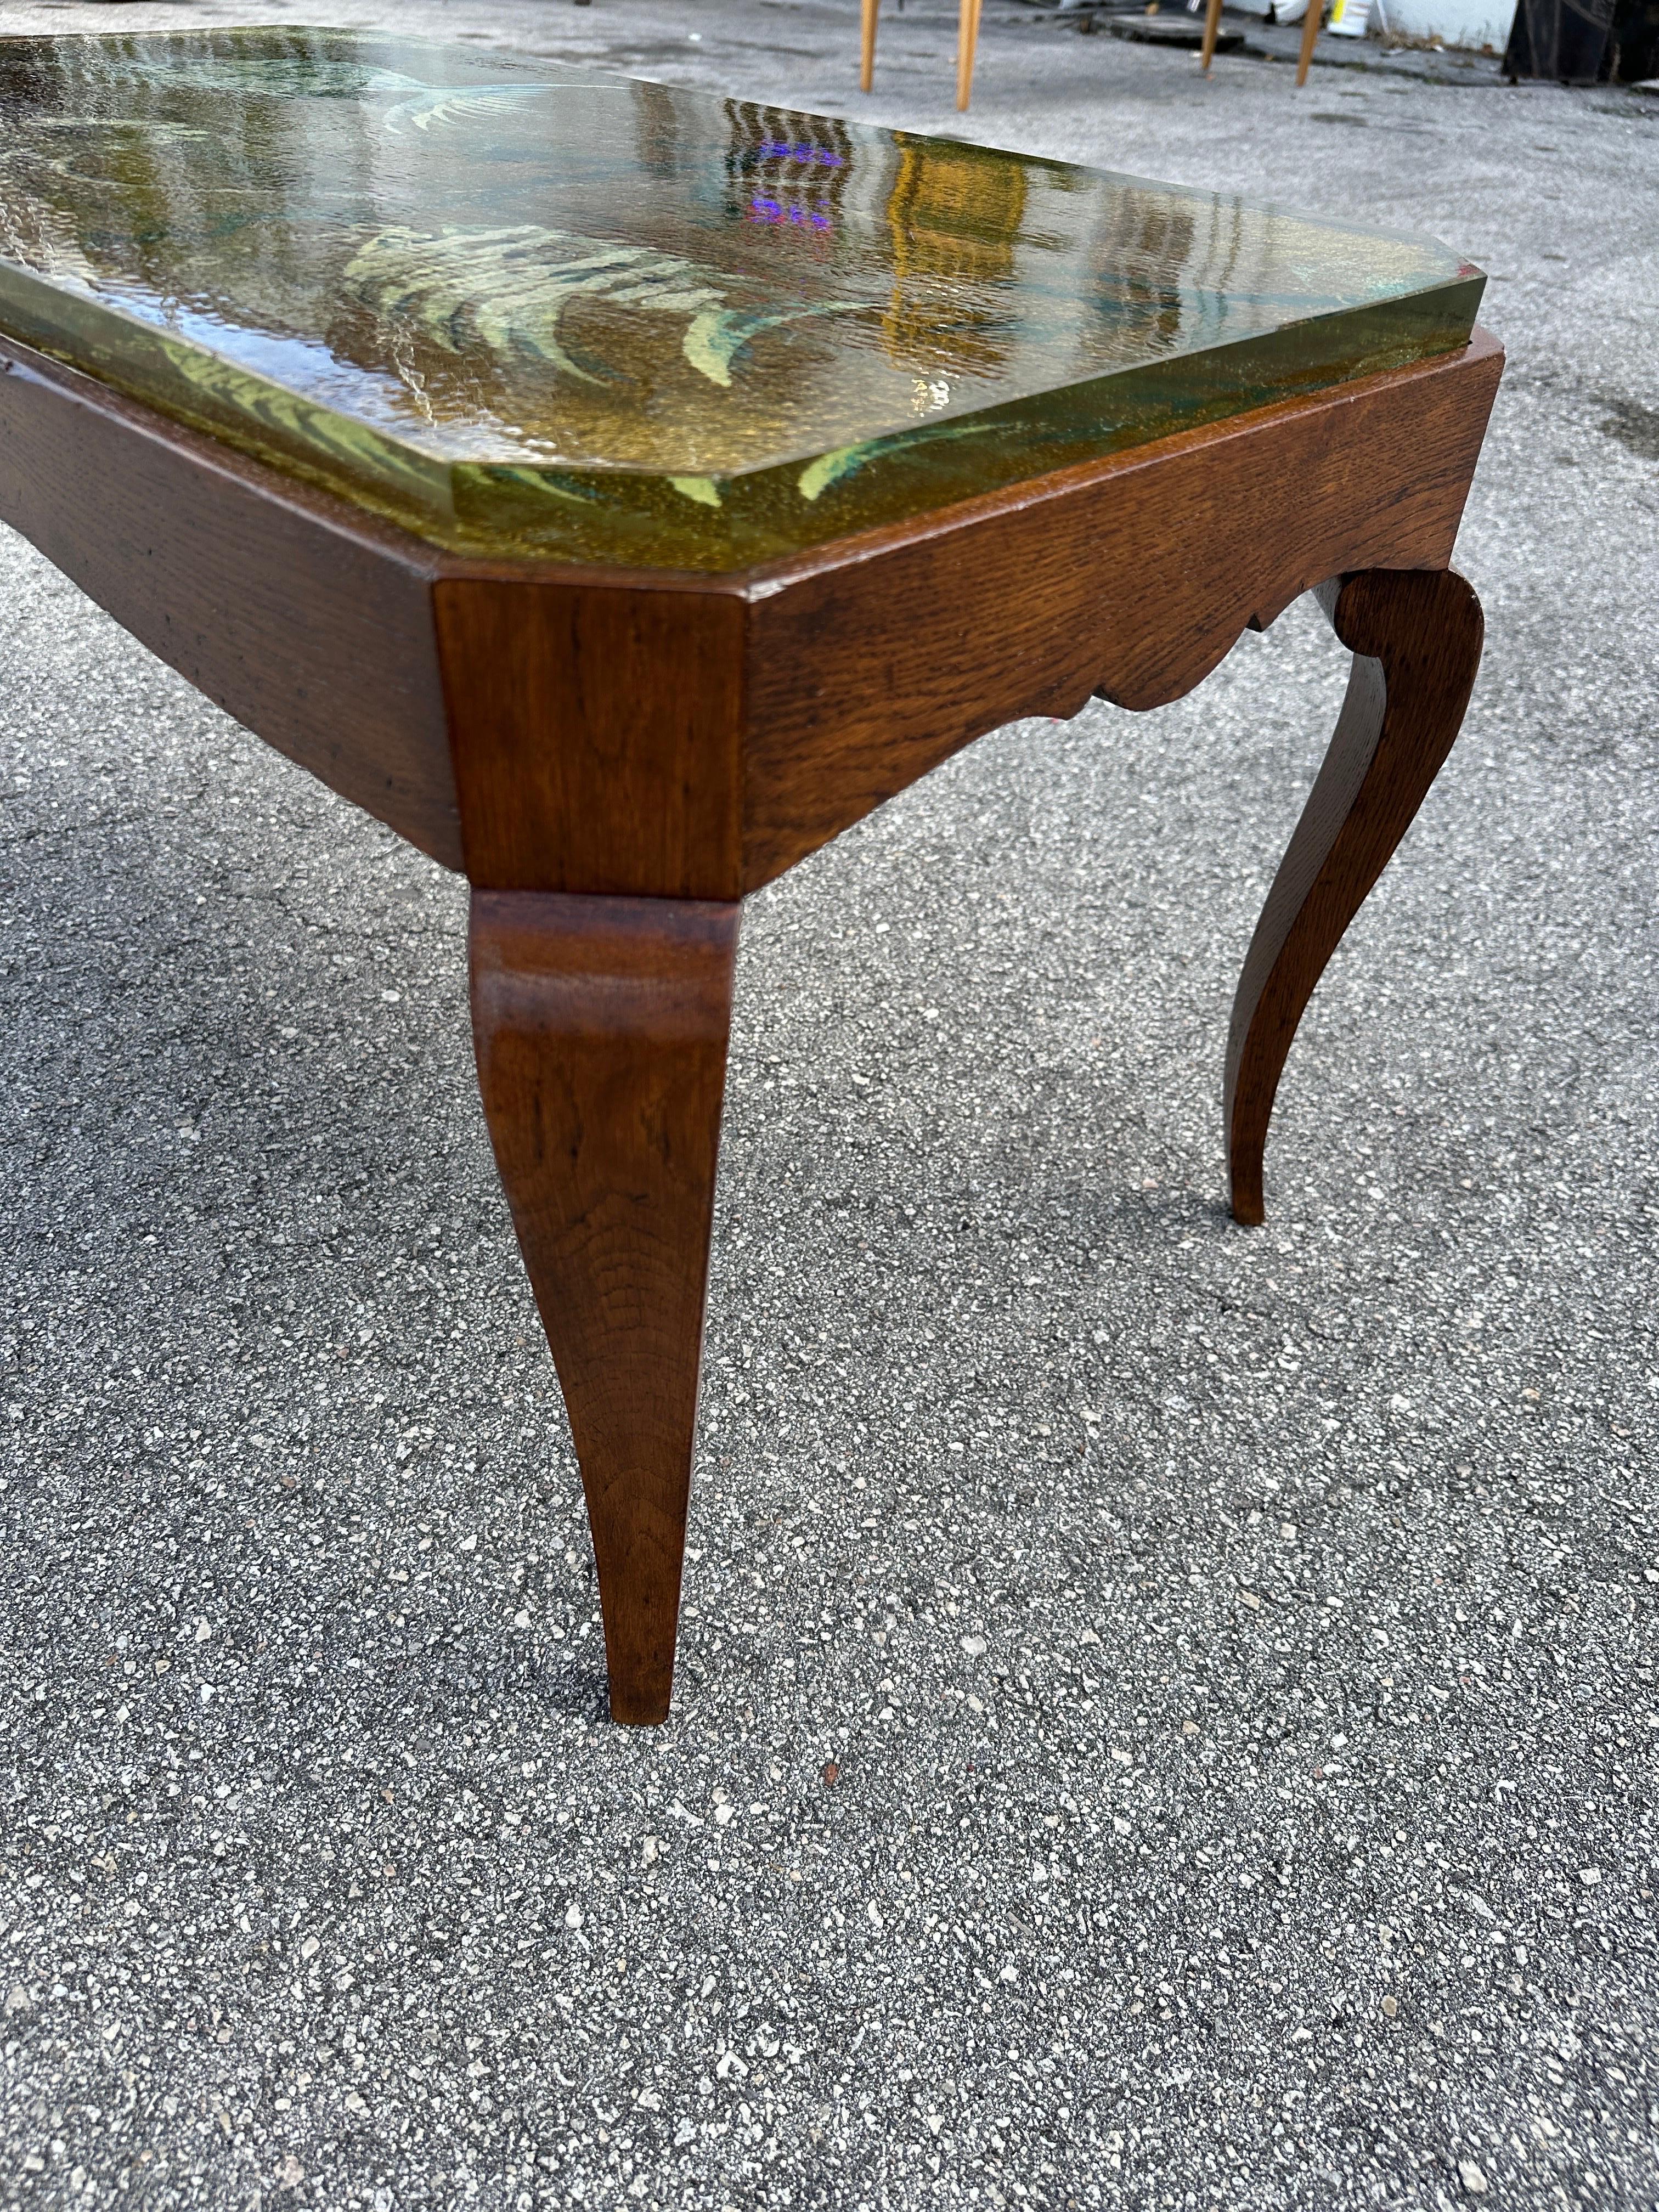 Beautifully reverse painted thick glass top with an aquarium scene in tones of gold, blues and greens. Art Deco mahogany wood base is rich with color and features scalloped edges and cabriolet legs. Very much in the style of René Prou.  THIS ITEM IS